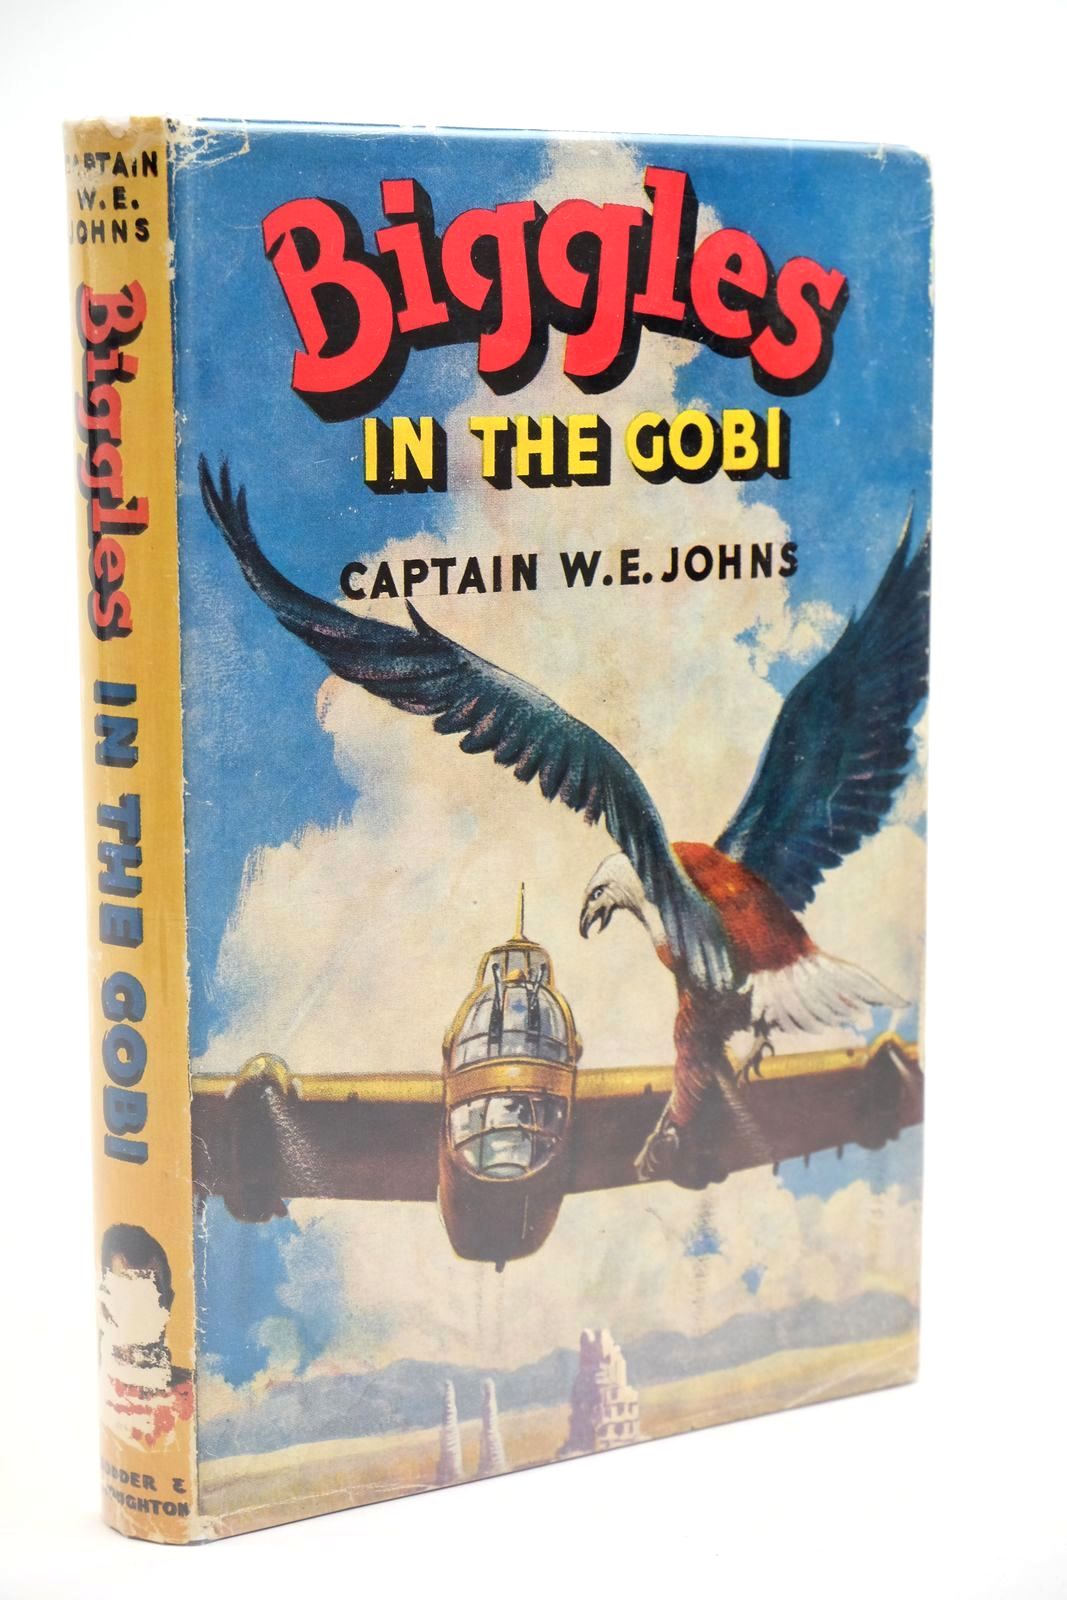 Photo of BIGGLES IN THE GOBI written by Johns, W.E. illustrated by Stead,  published by Hodder & Stoughton (STOCK CODE: 1323249)  for sale by Stella & Rose's Books